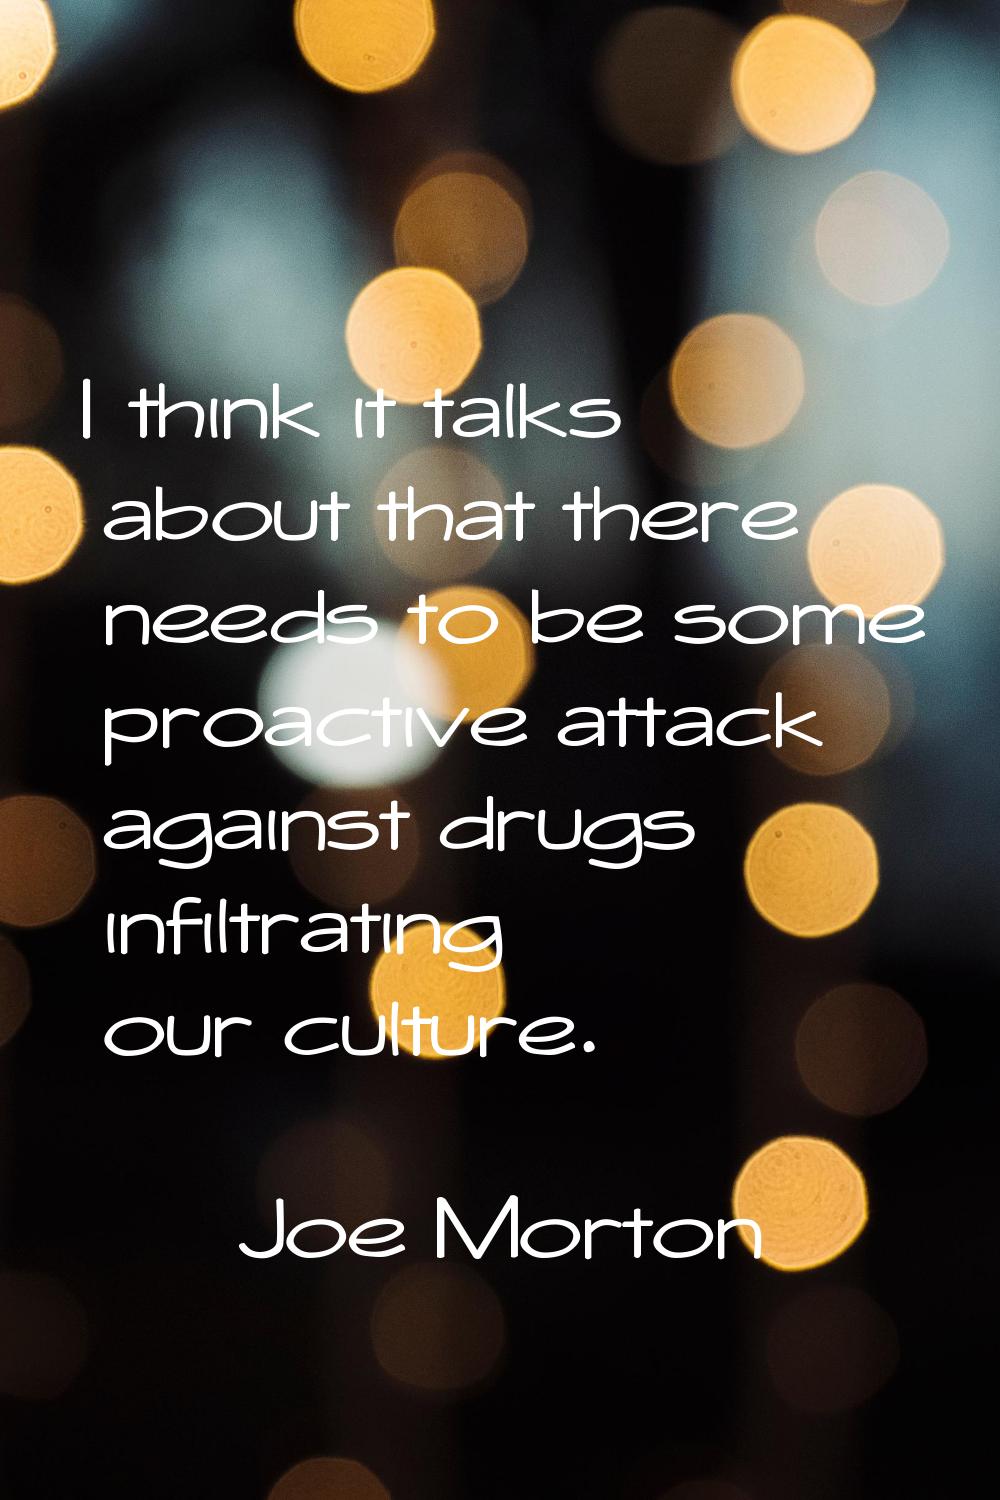 I think it talks about that there needs to be some proactive attack against drugs infiltrating our 